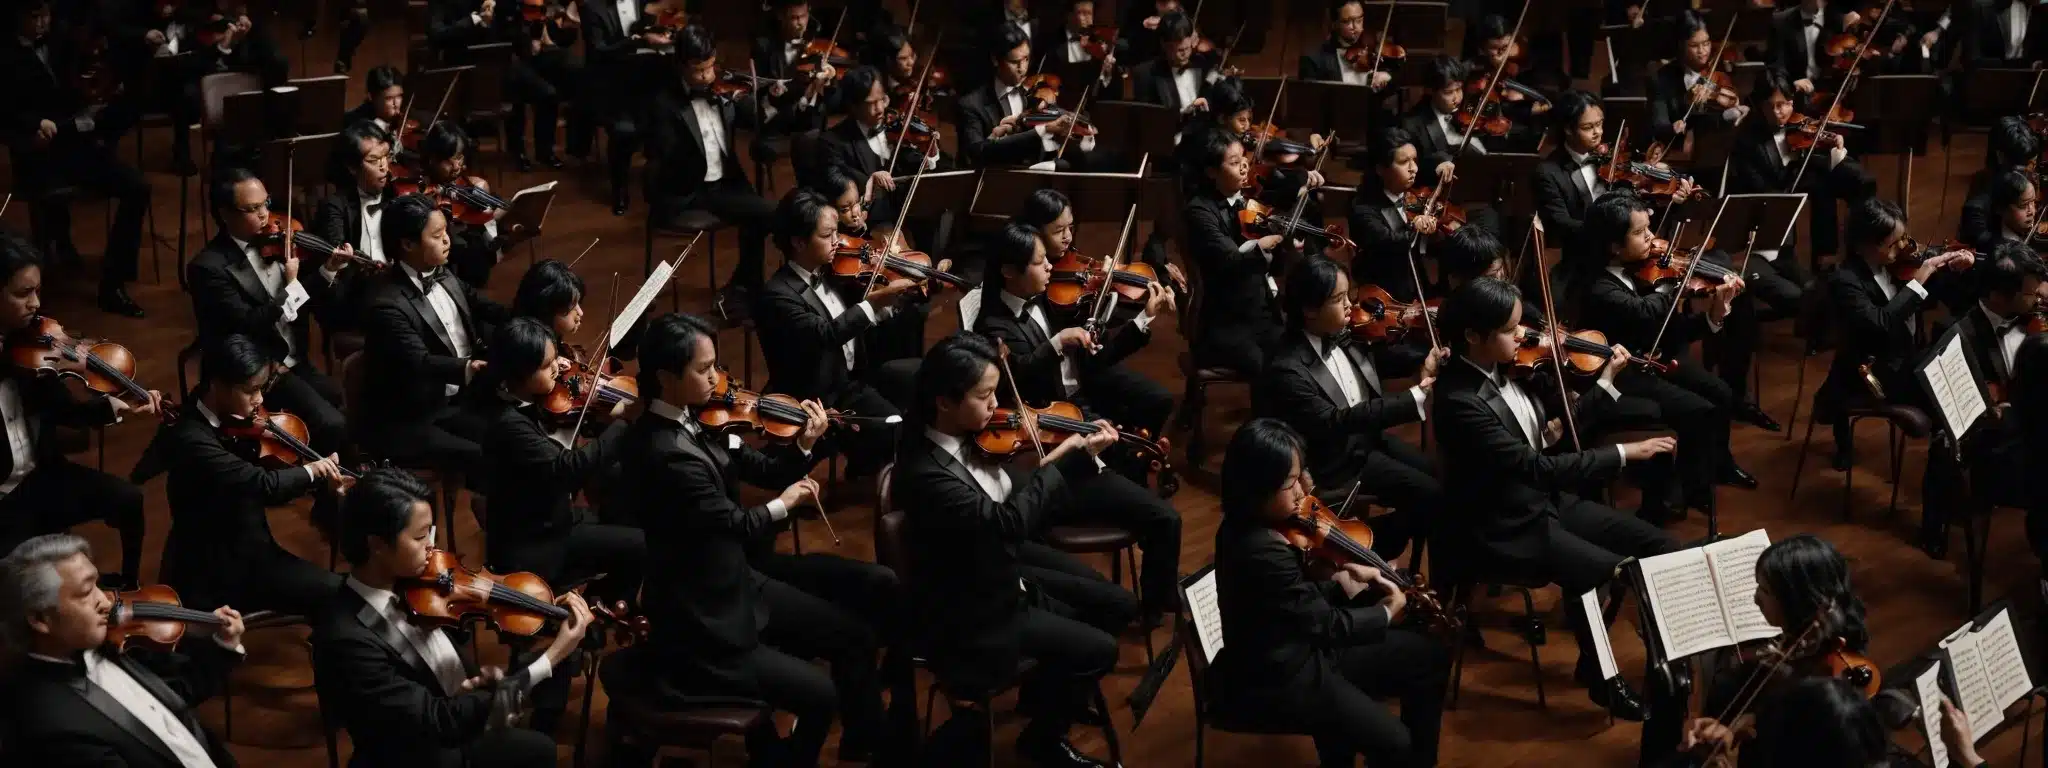 A Symphony Orchestra Performing In Unison, Exemplifying Harmony And Precision.